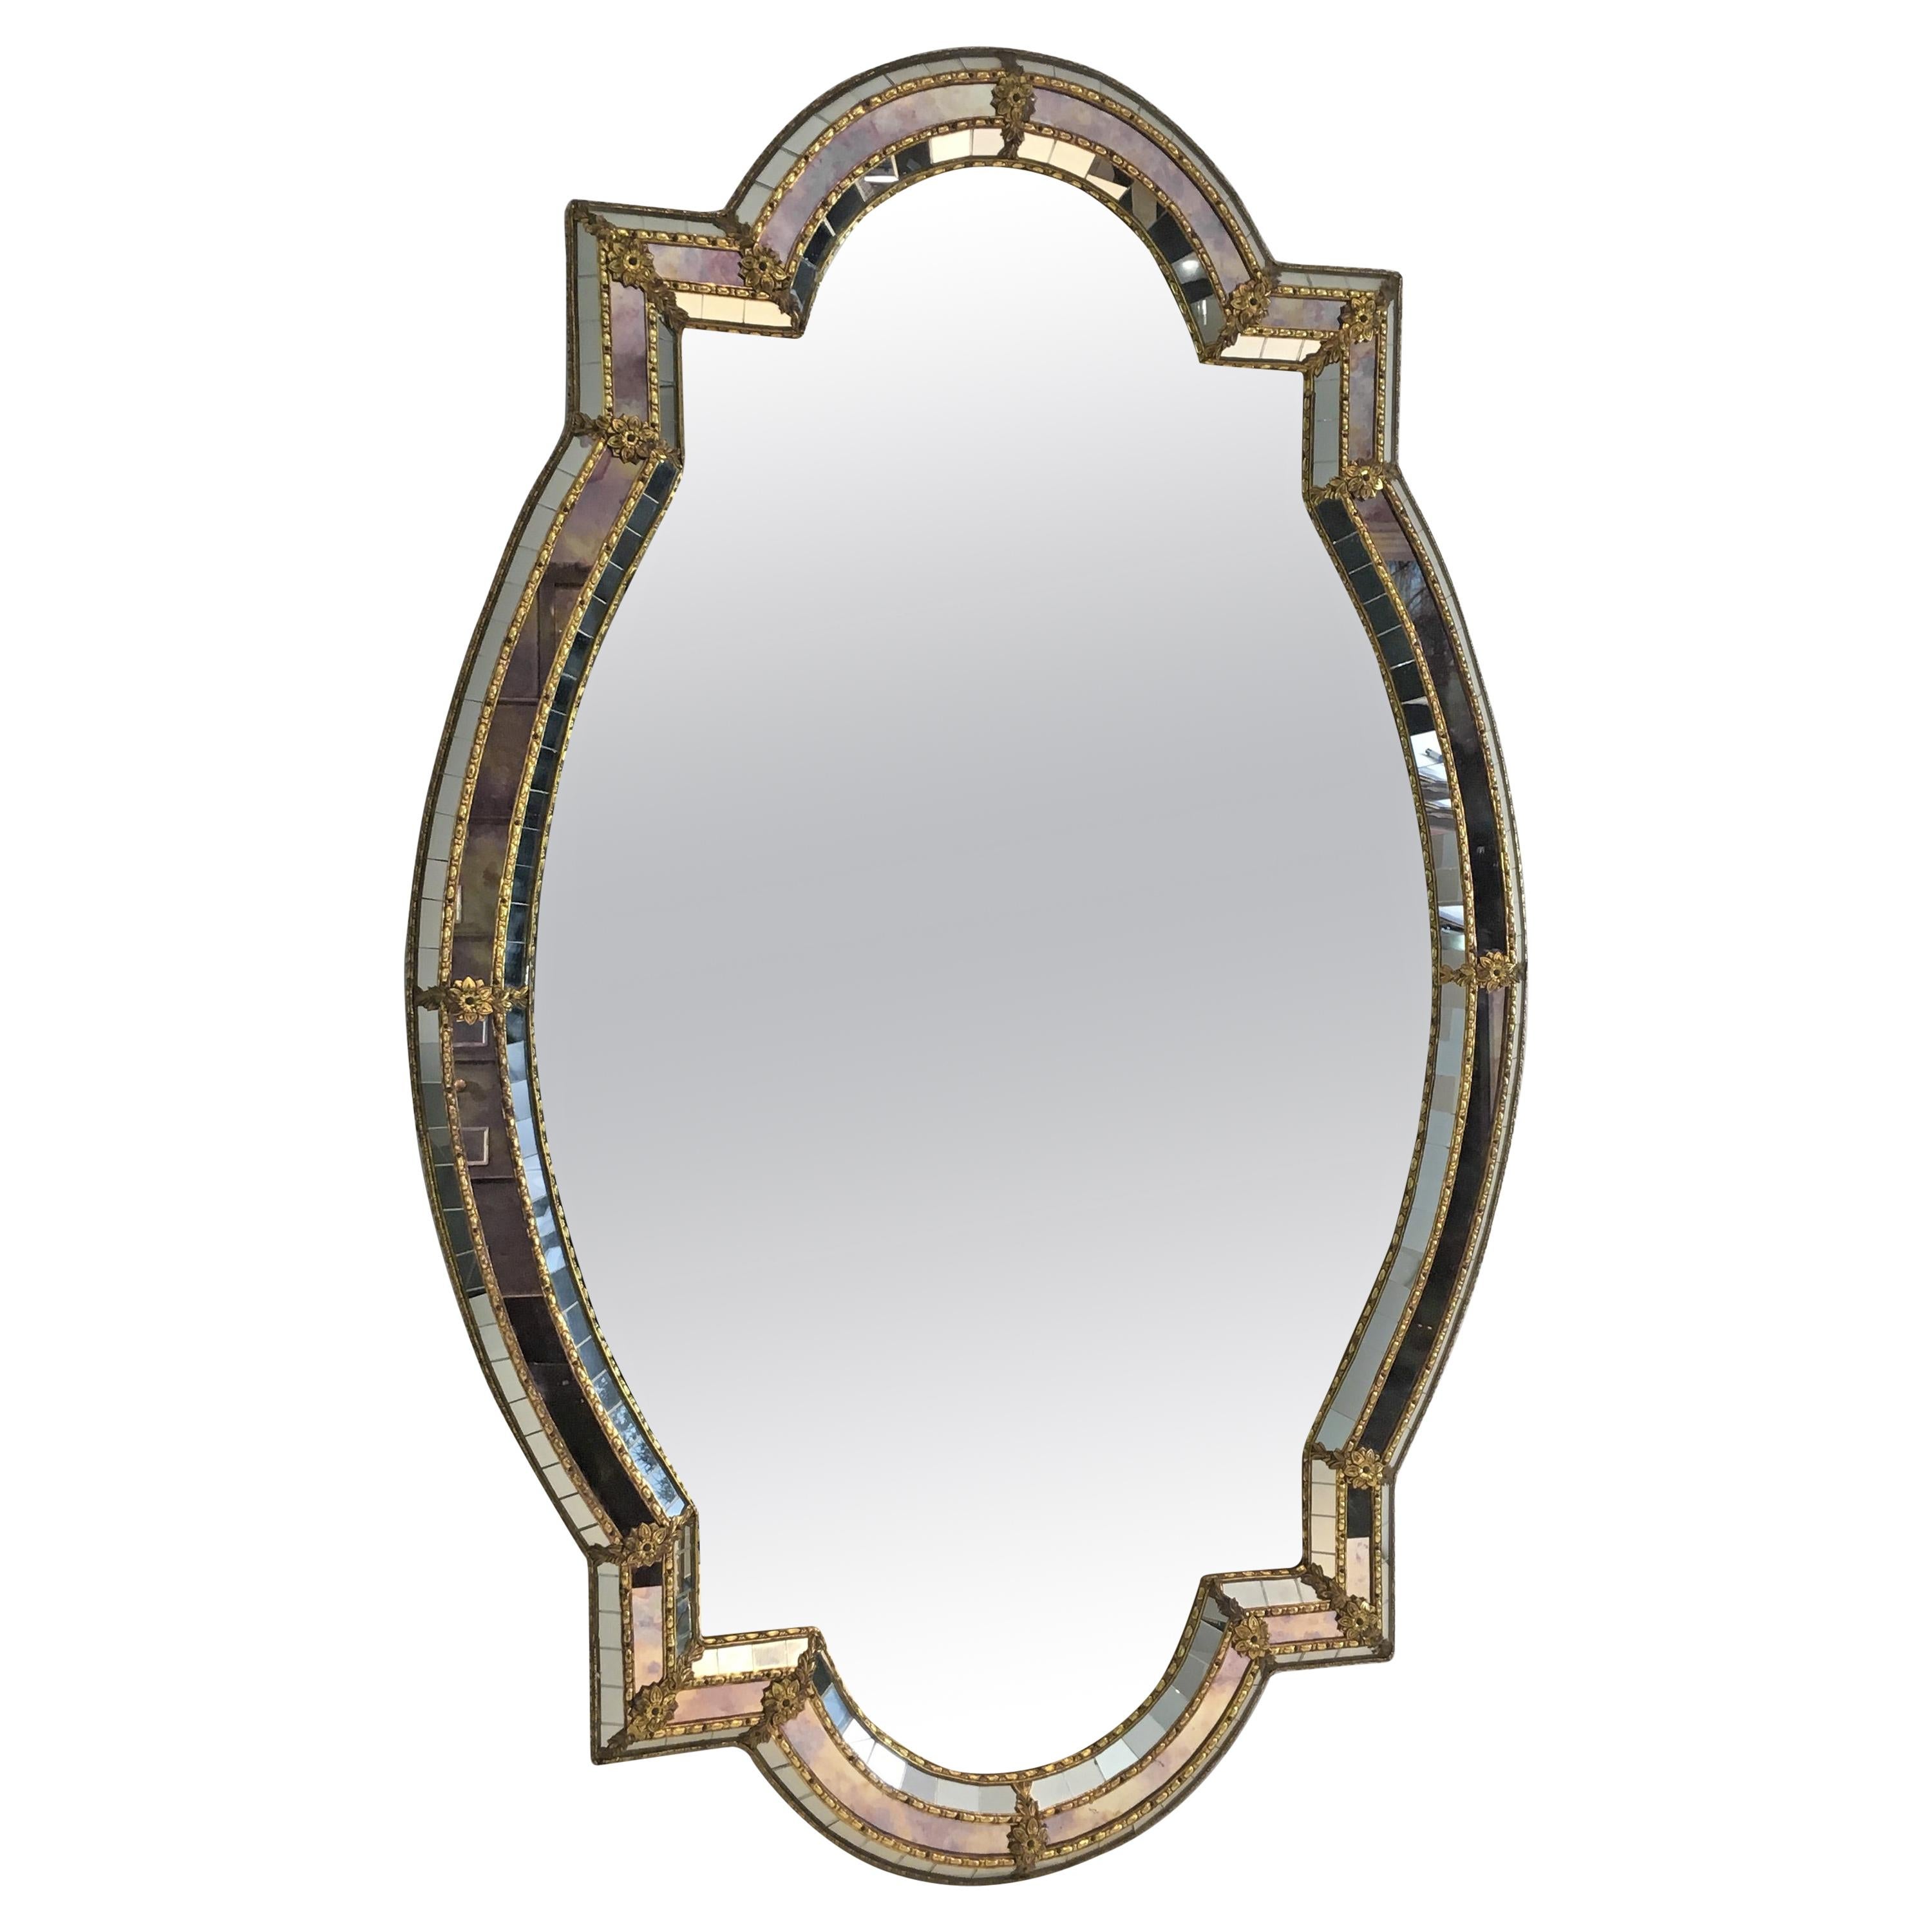 Unusual Shape Multi-Faceted Mirror with Mirrors Mosaics, Brass Flowers